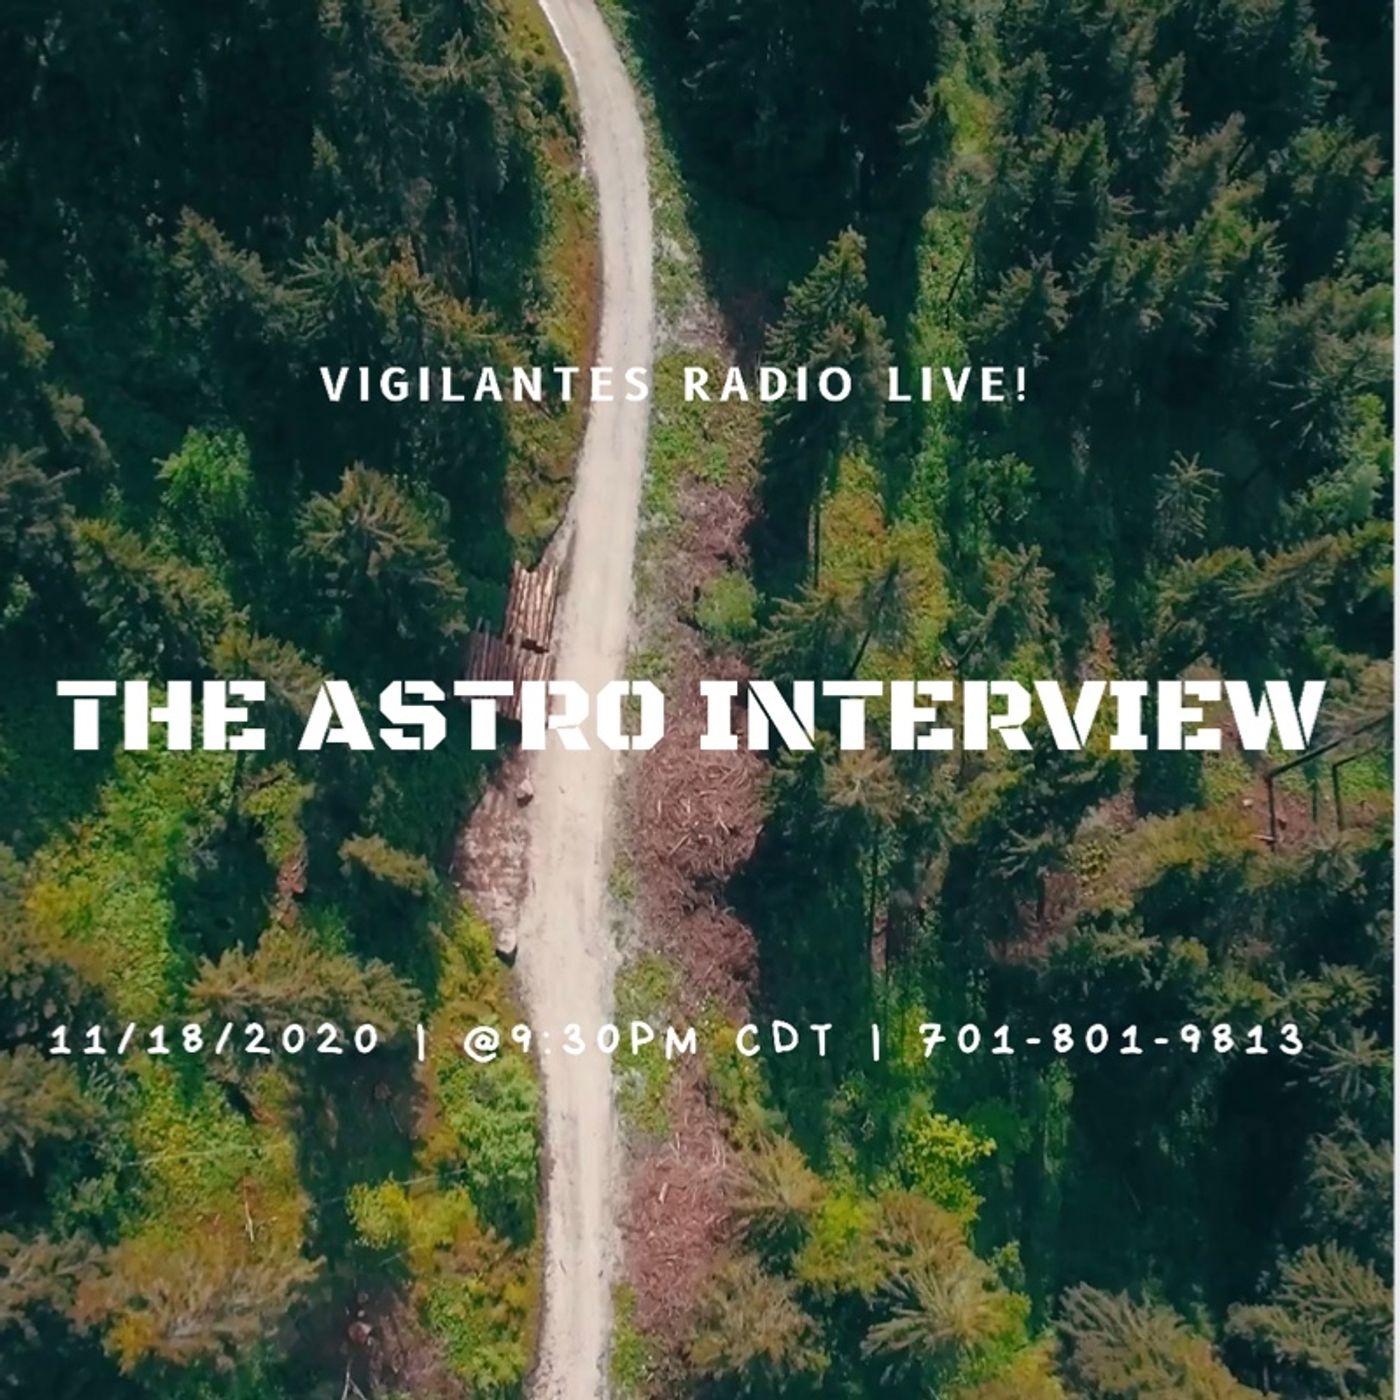 The Astro Interview. Image